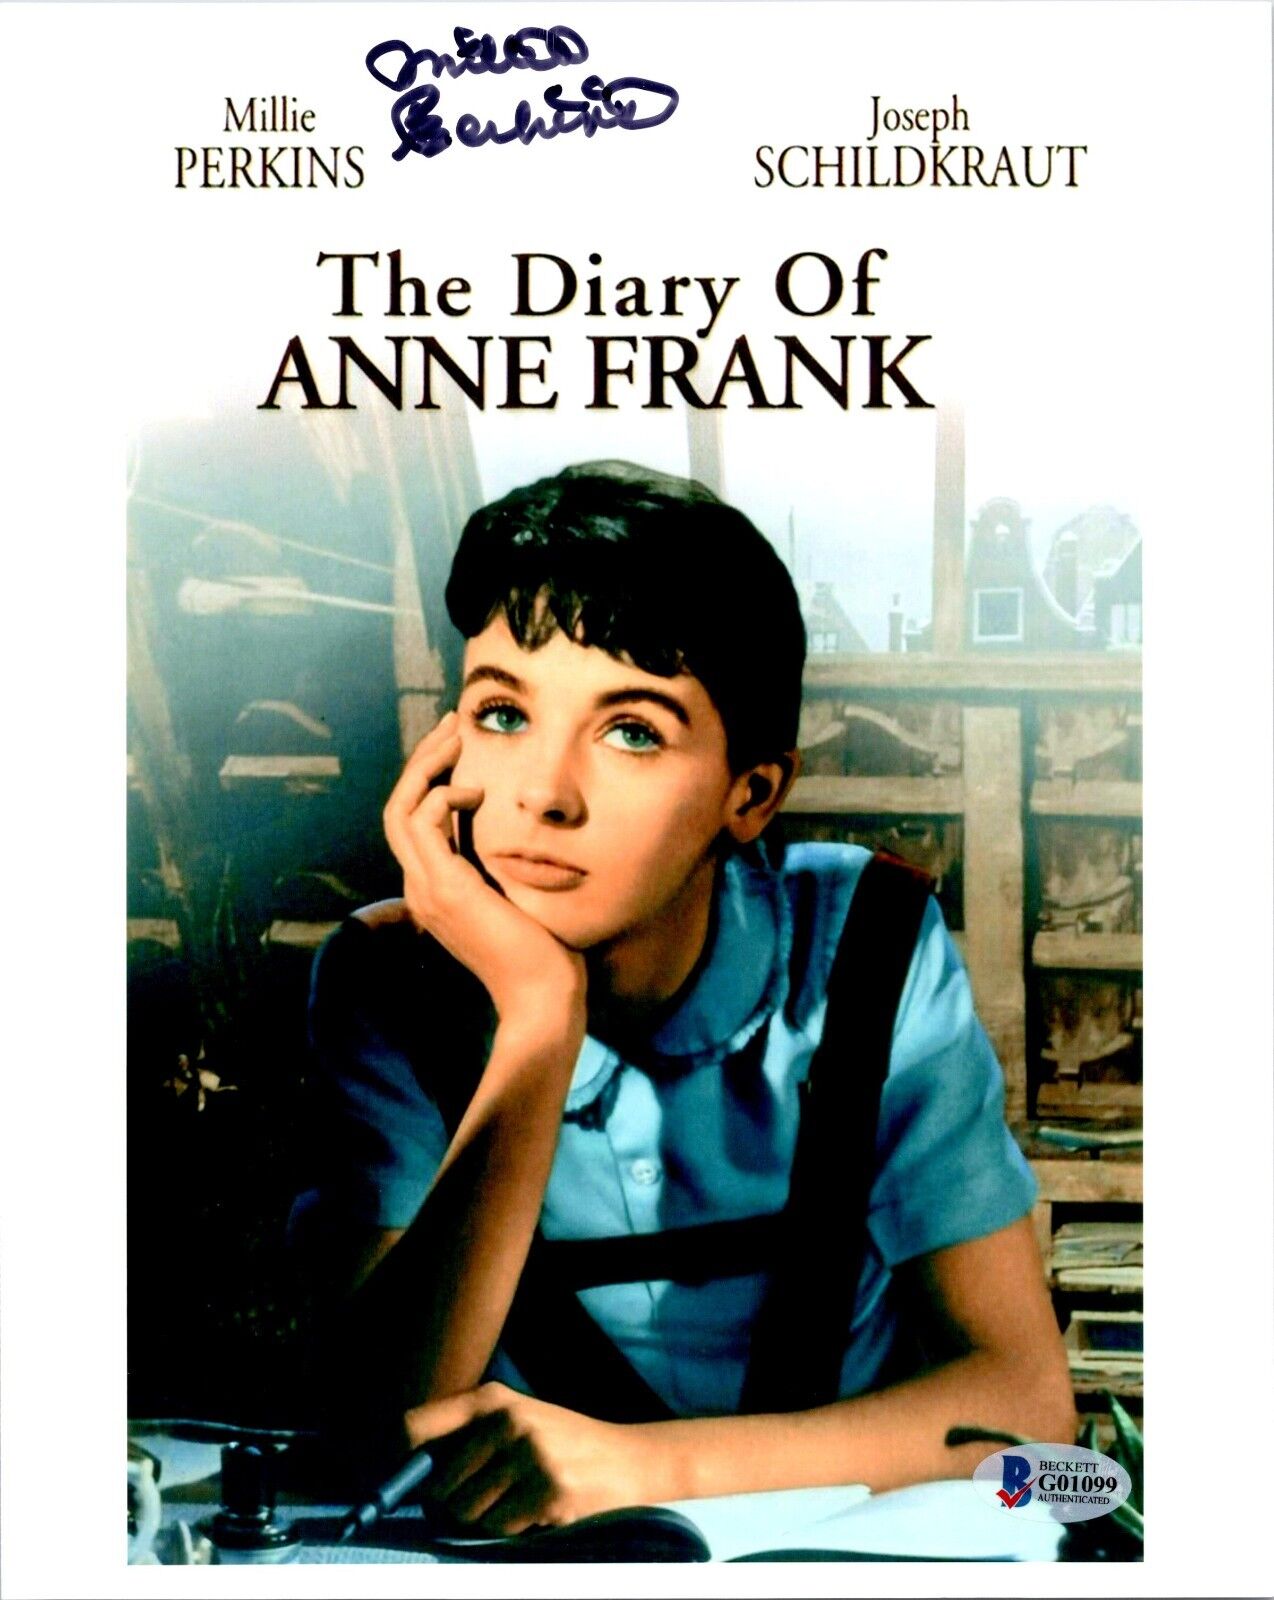 Millie Perkins 'Diary of Anne Frank' Autographed Photo Beckett Authentication